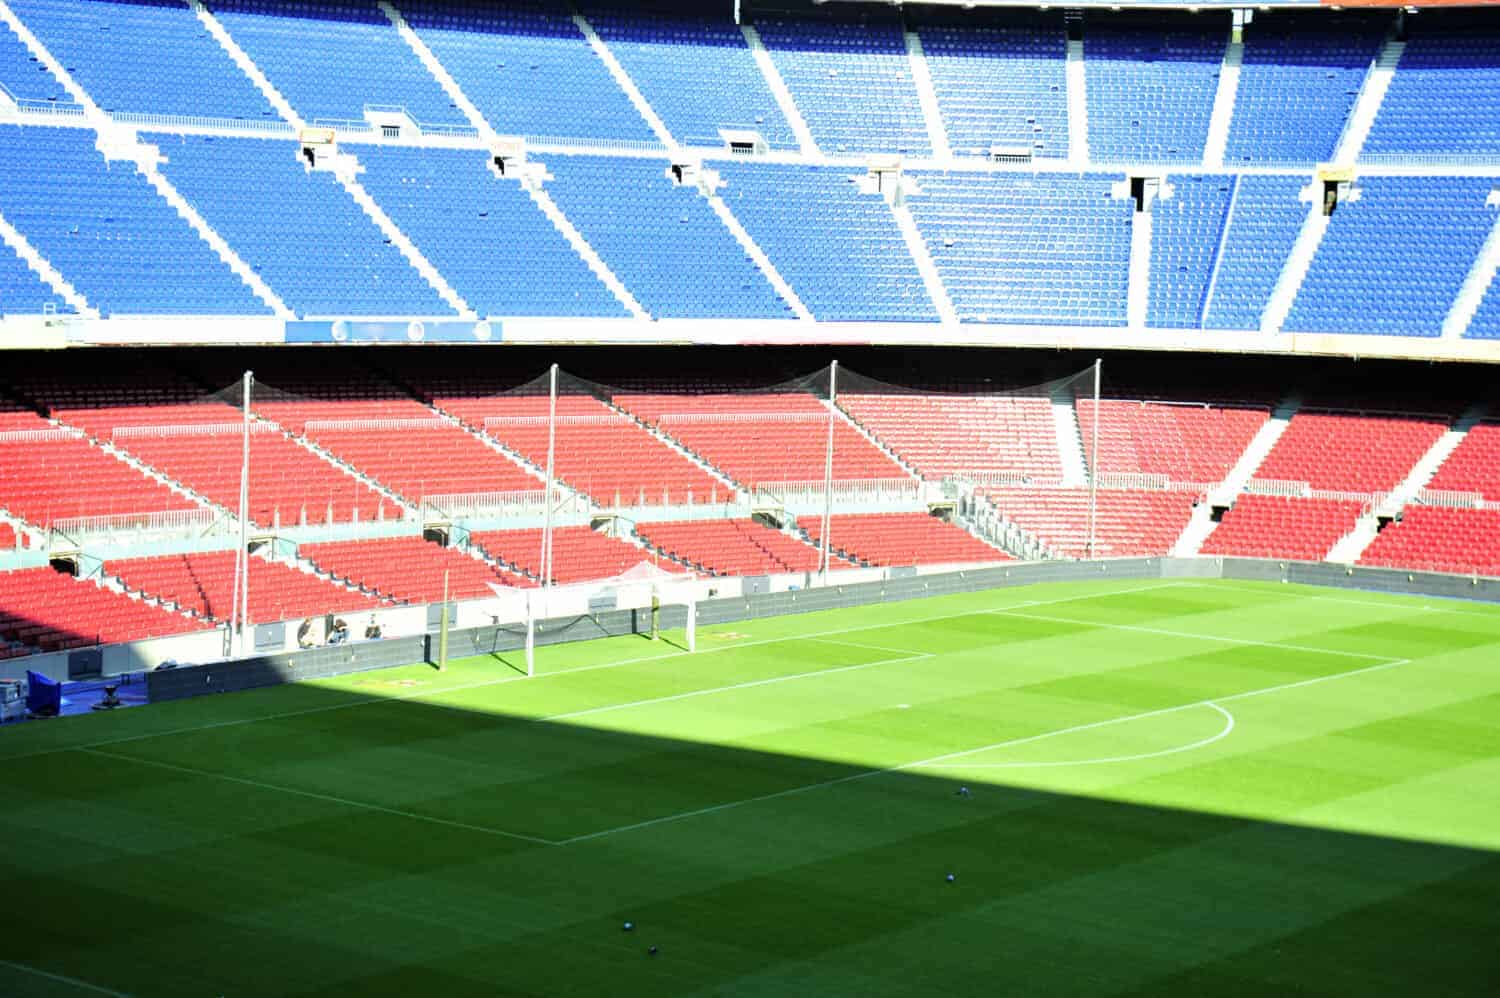 <p><strong>Year Construction Began:</strong> 1954</p>    <p><strong>Construction Completion:</strong> 1957</p>    <p>Camp Nou is in Barcelona, Spain, a region known for its art, architecture, culture, and Mediterranean atmosphere. </p><p>Remember to scroll up and hit the ‘Follow’ button to keep up with the newest stories from Seattle Travel on your Microsoft Start feed or MSN homepage!</p>